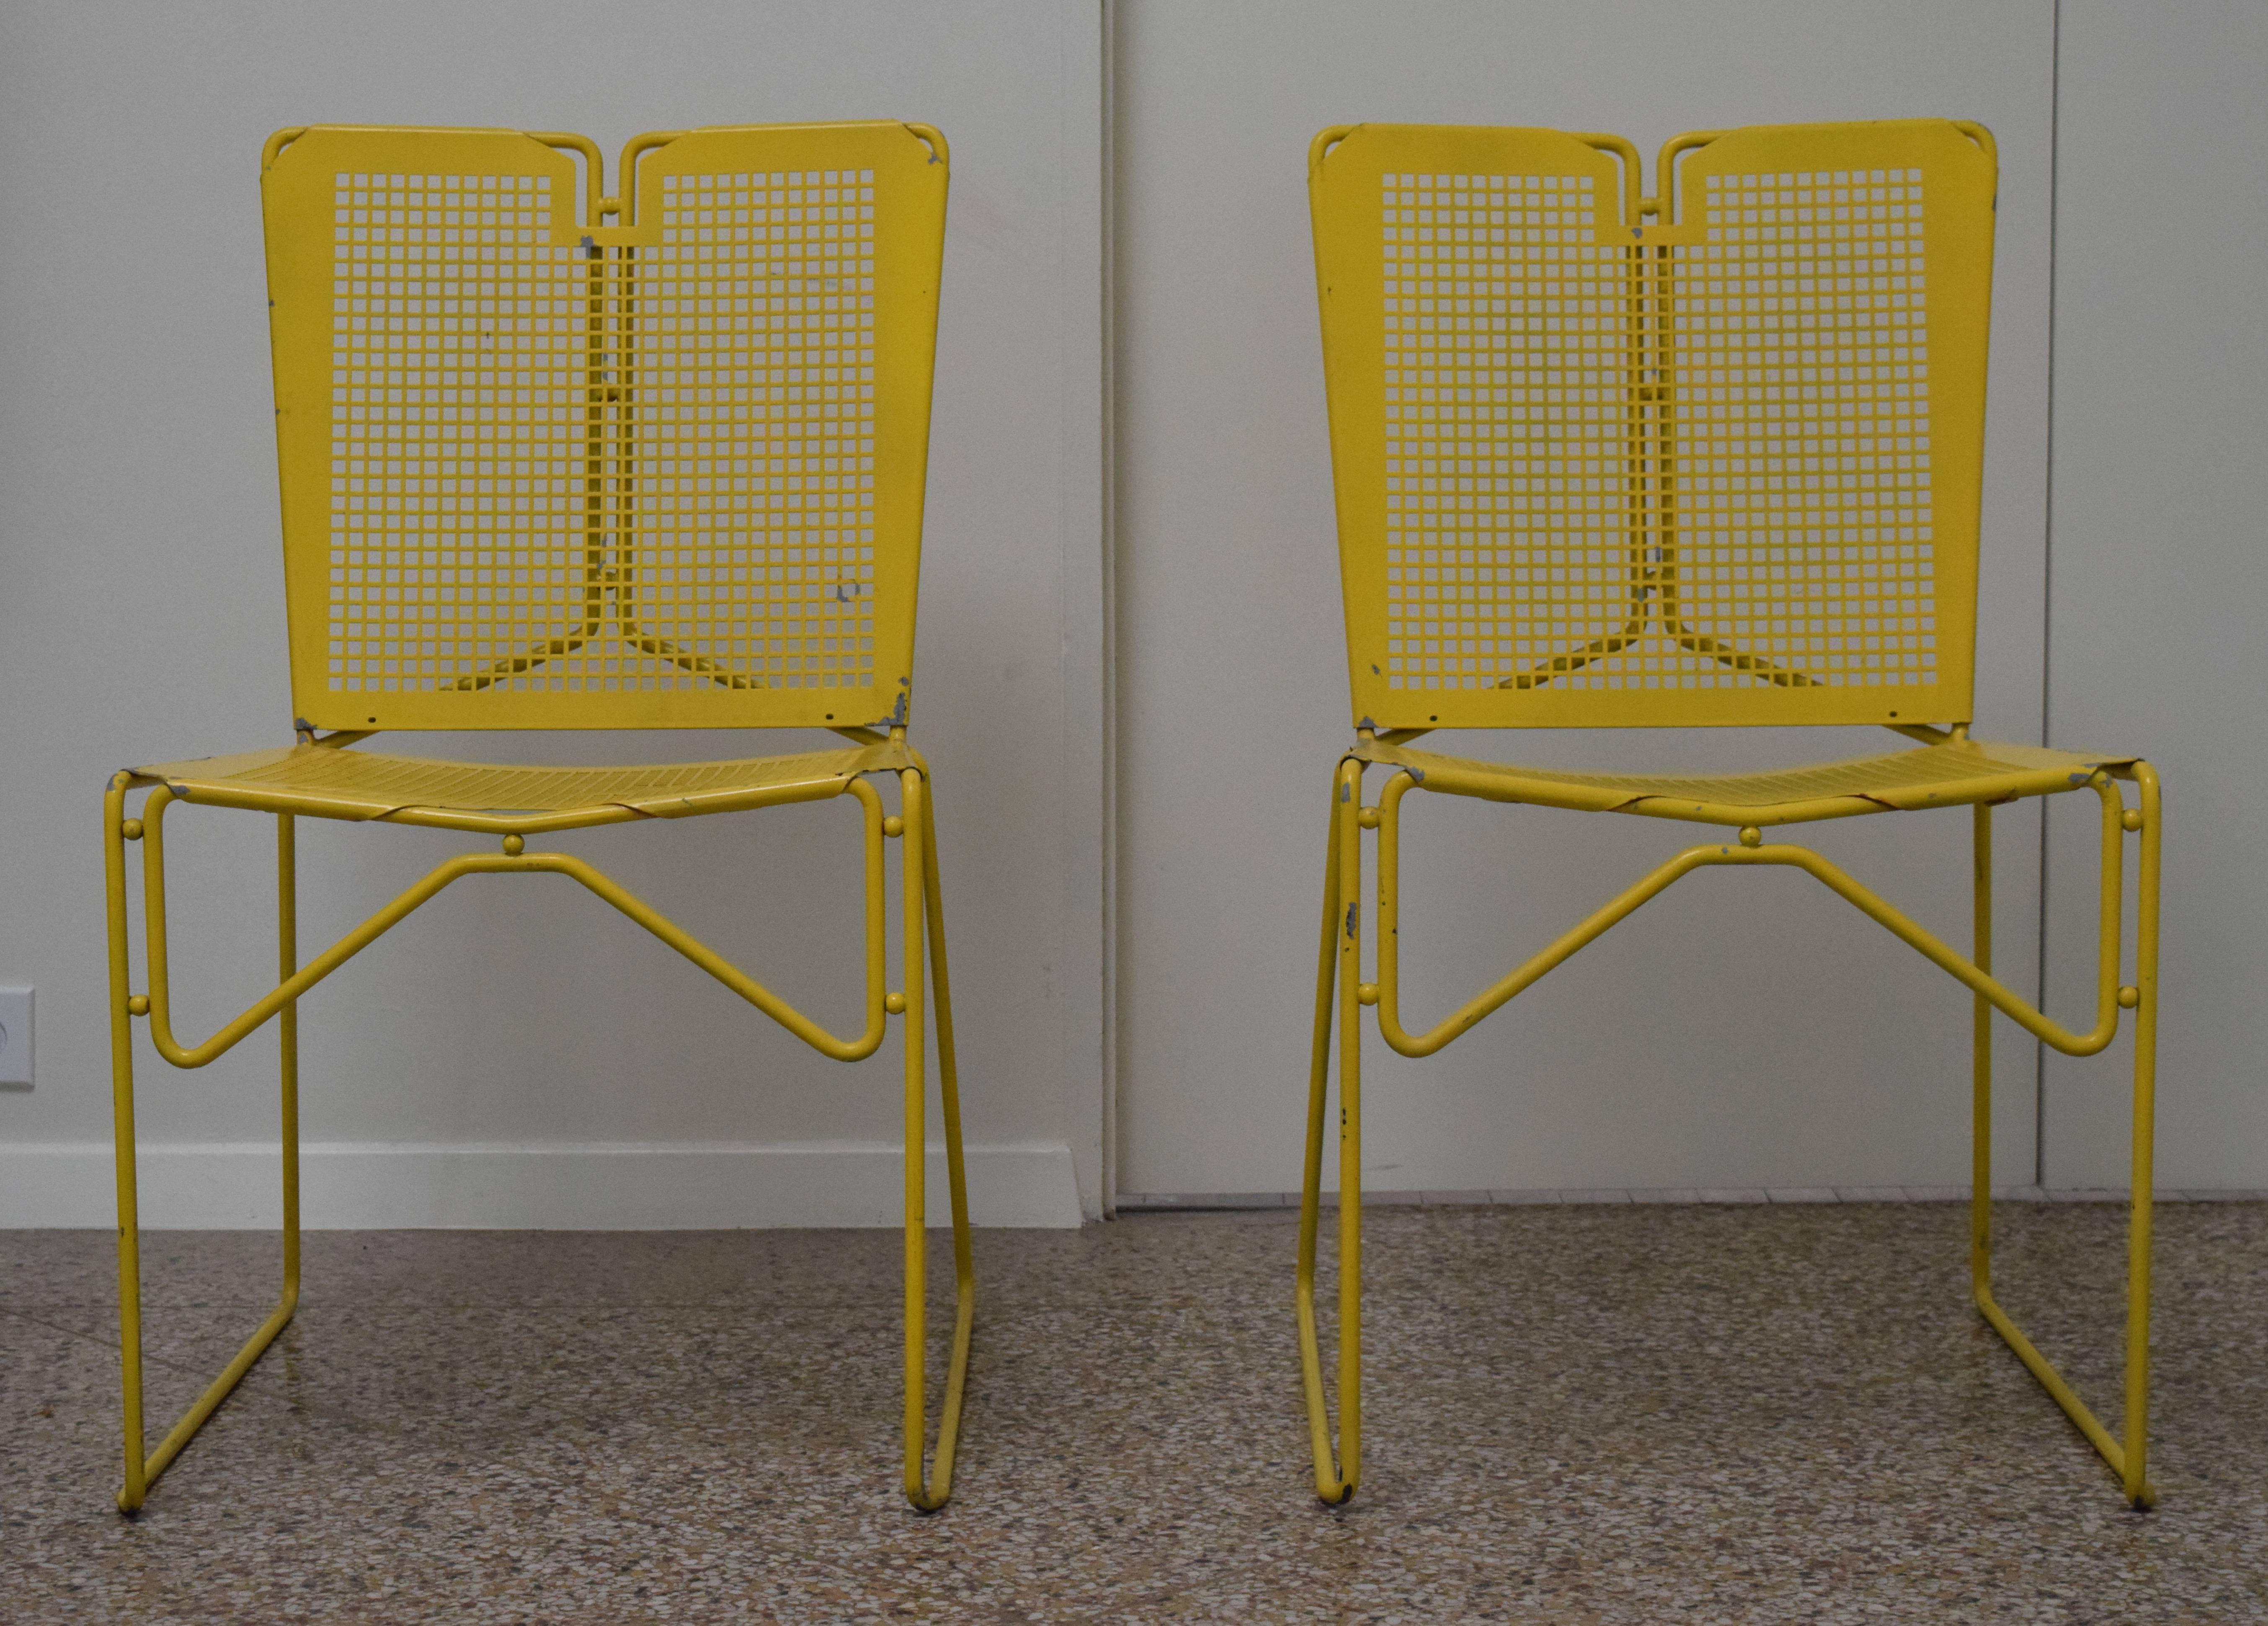 Style of Mathieu Matégot chairs in gridded perforated metal.